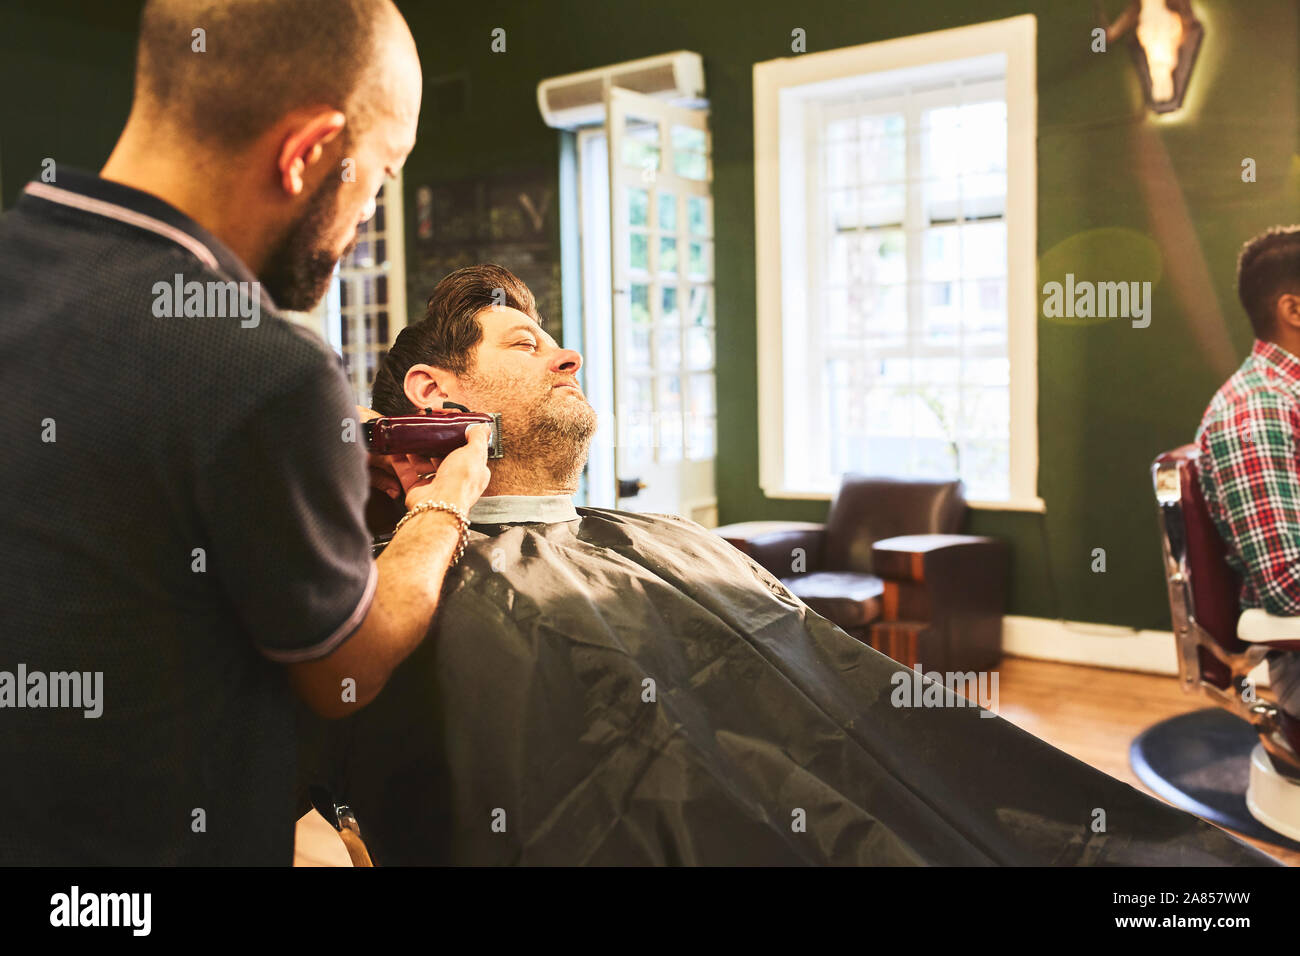 Man receiving a shave in barbershop Stock Photo